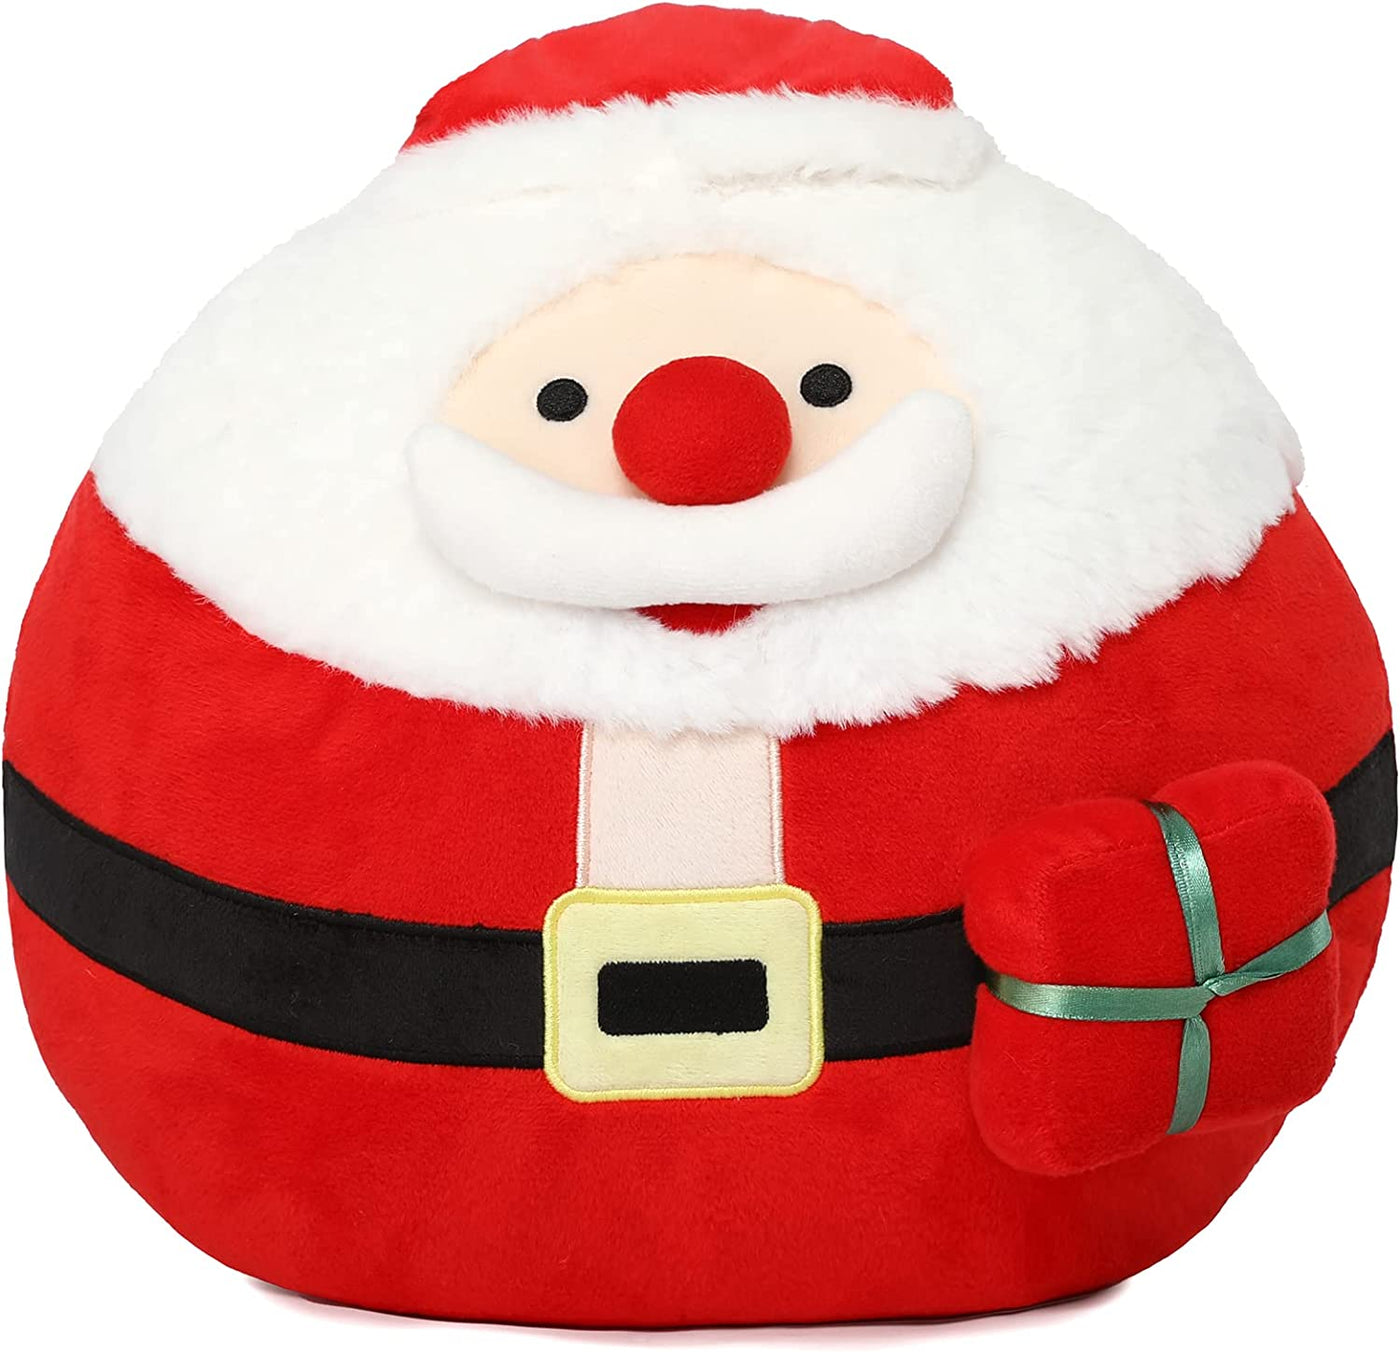 Christmas Santa Claus Stuffed Toy, 10 Inches